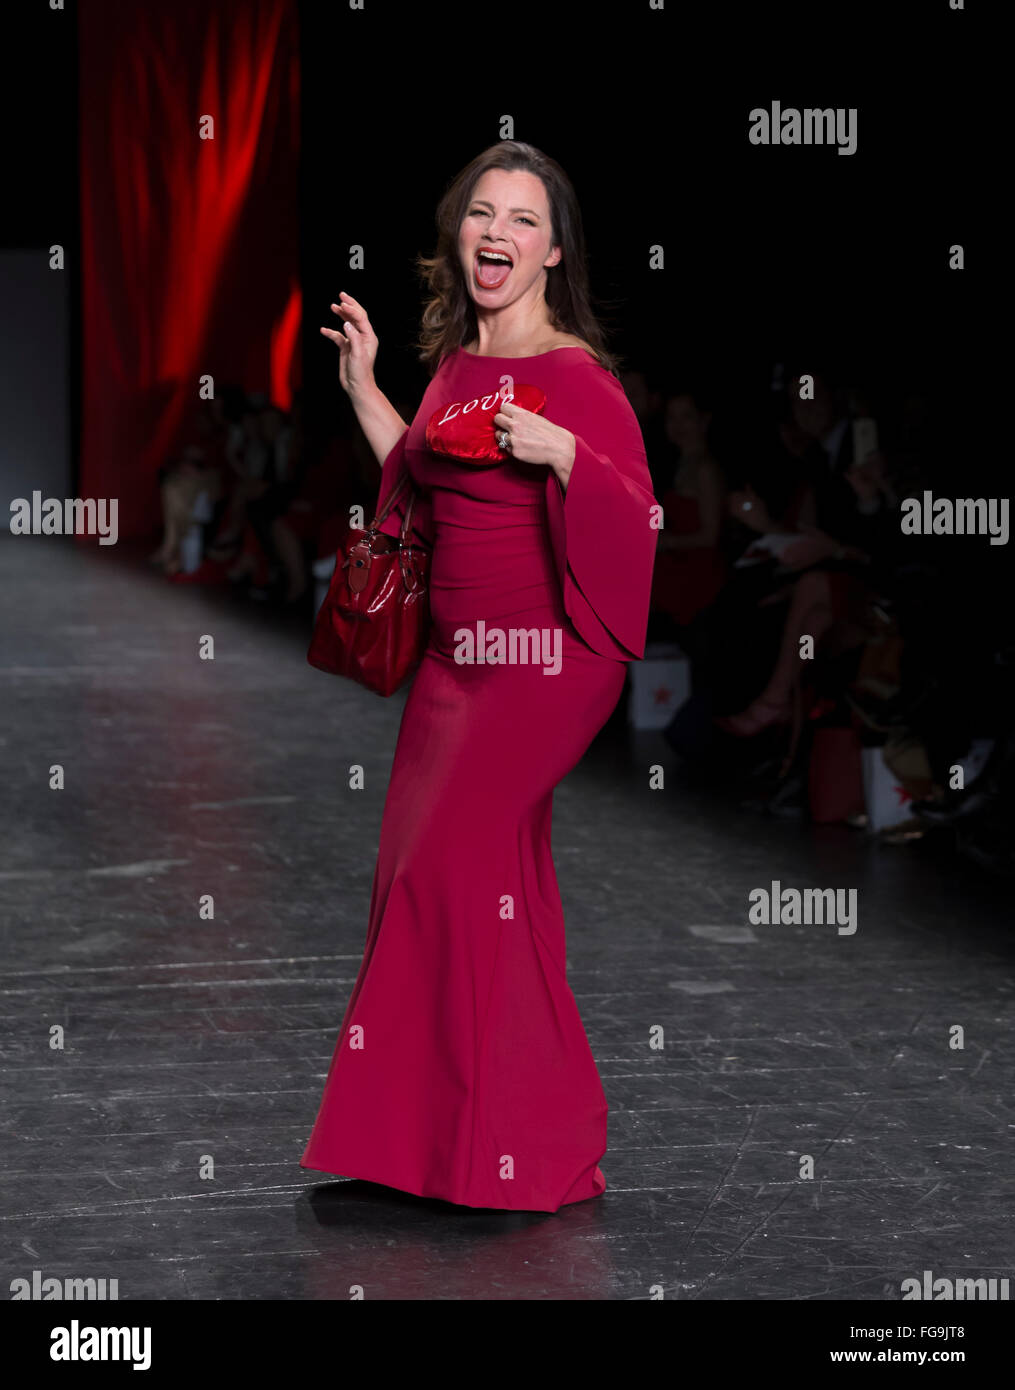 NEW YORK, NY - FEBRUARY 11, 2016: Fran Drescher wearing dress by La Petite Robe Di Chara Boni walks runway for the Heart Truth Red Dress Collection 2016 fashion show at Moynihan Station Stock Photo